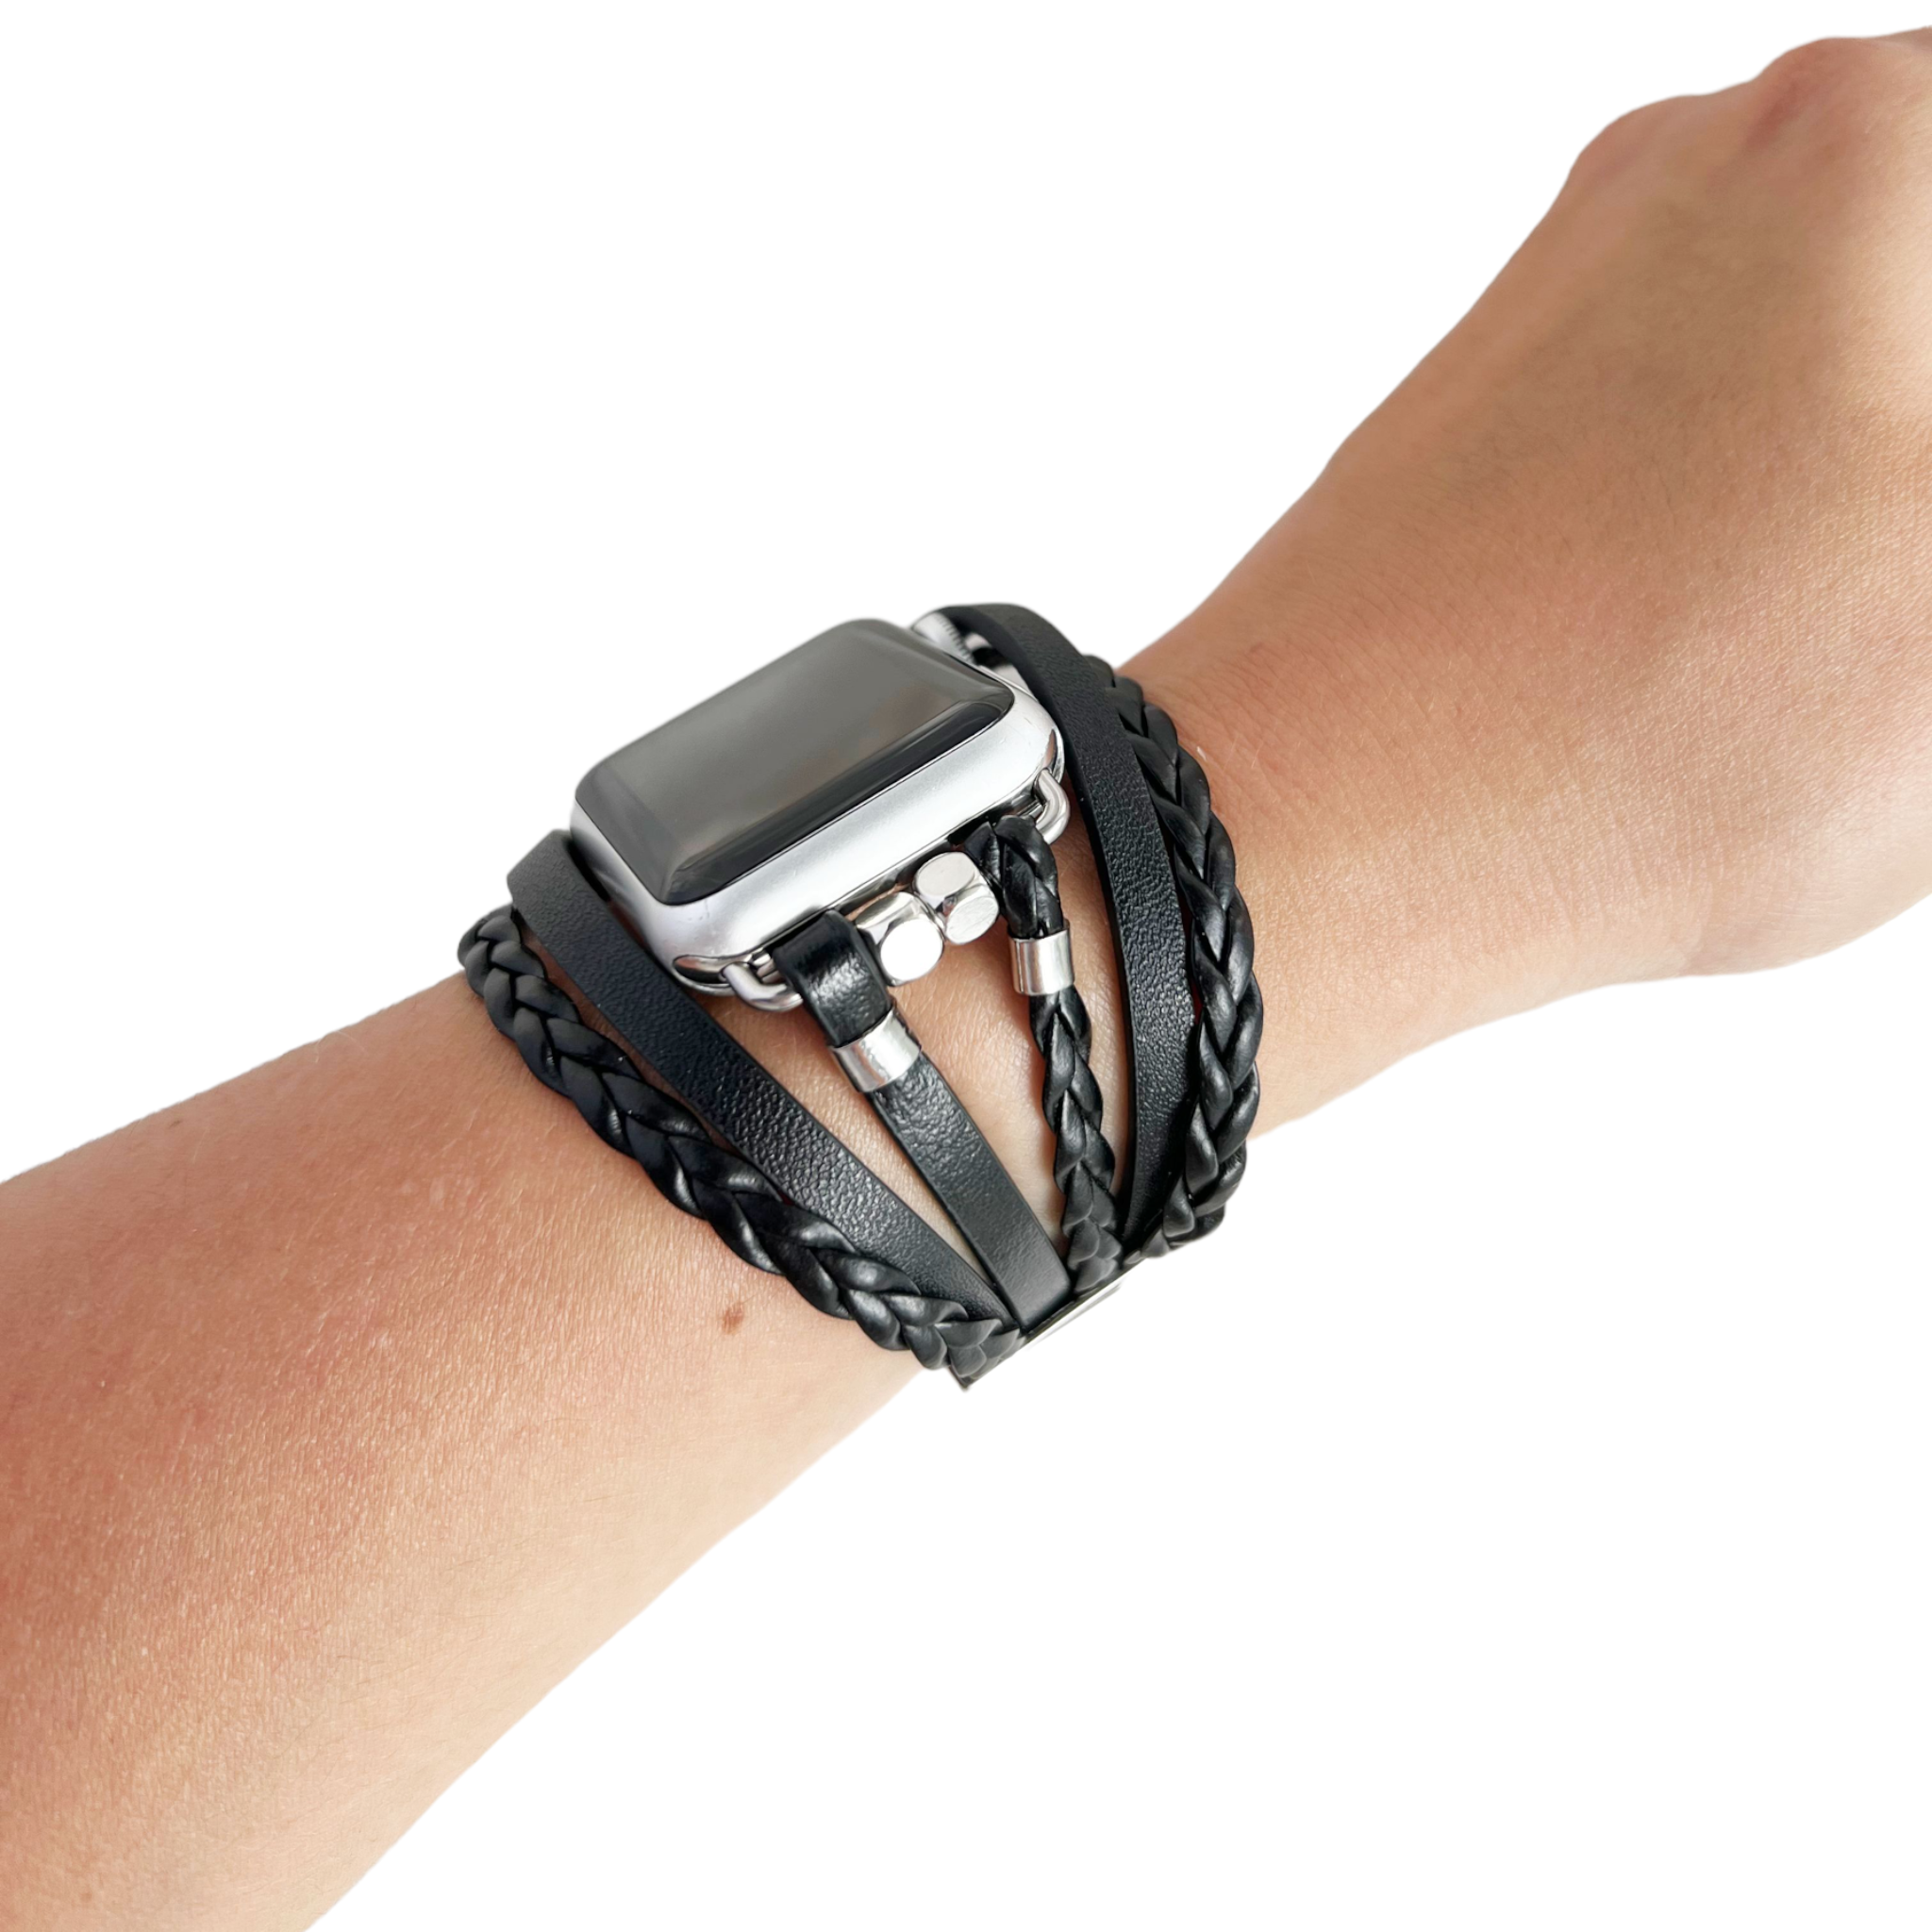 Silver Trimmed Watch Bracelet, Exclusive Black and Silver Galaxy Active Strap, Modern Galaxy Active Band, Stylish Silver-Embellished Bracelet, Contemporary Black Leather Strap